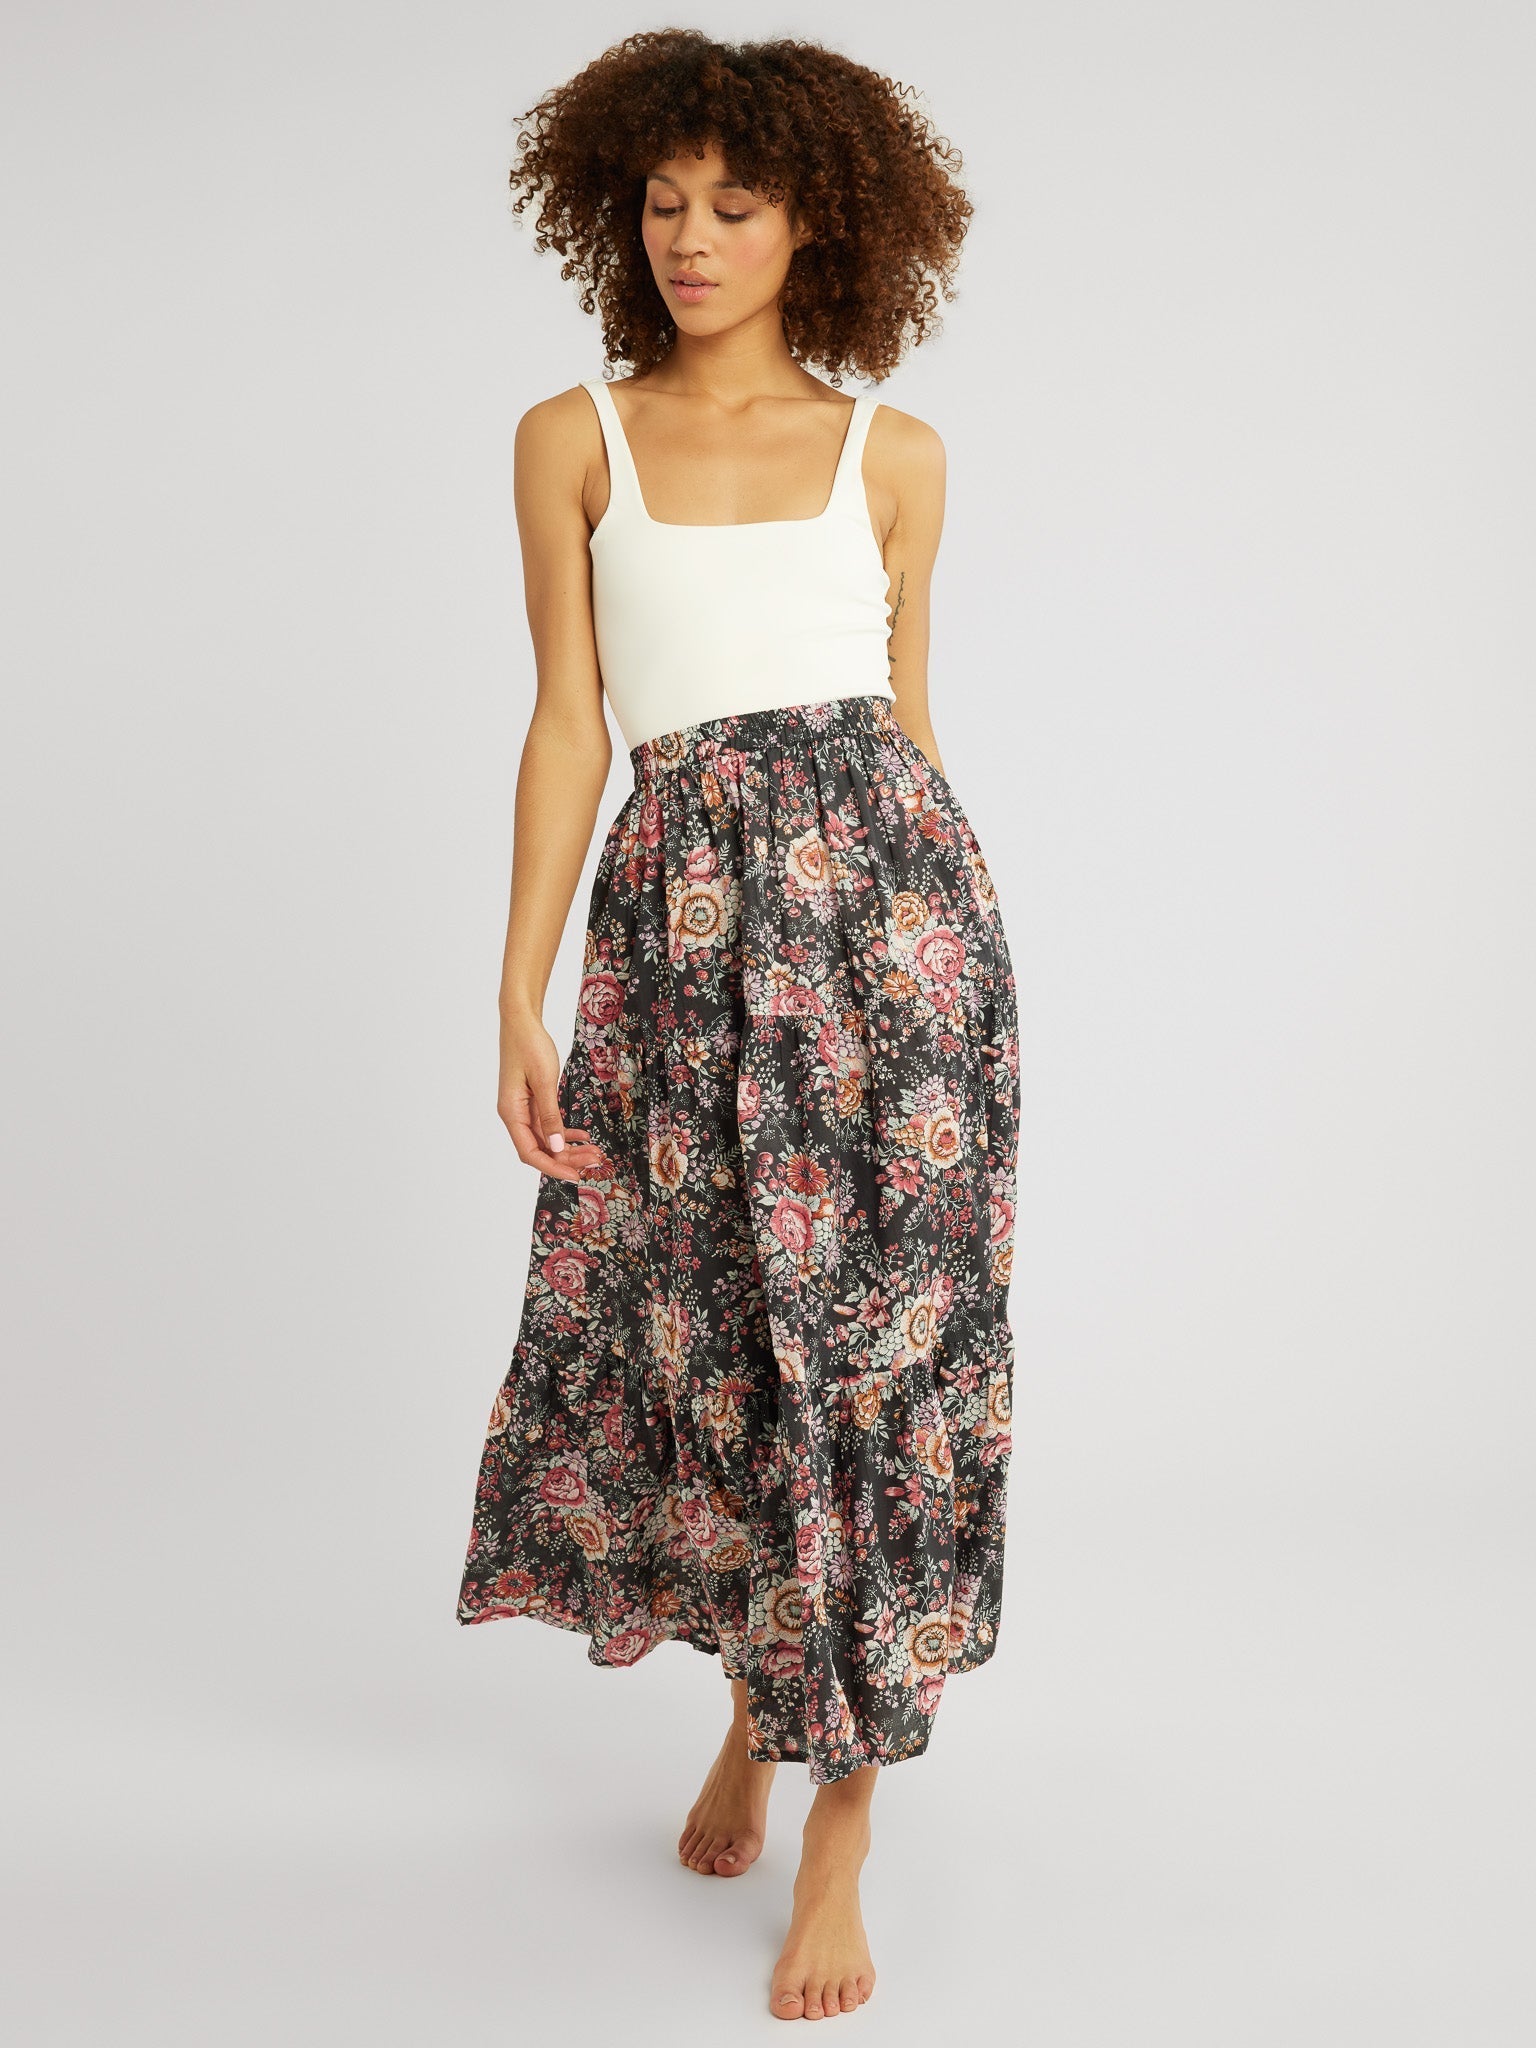 MILLE Clothing Paola Skirt in Bloomsbury